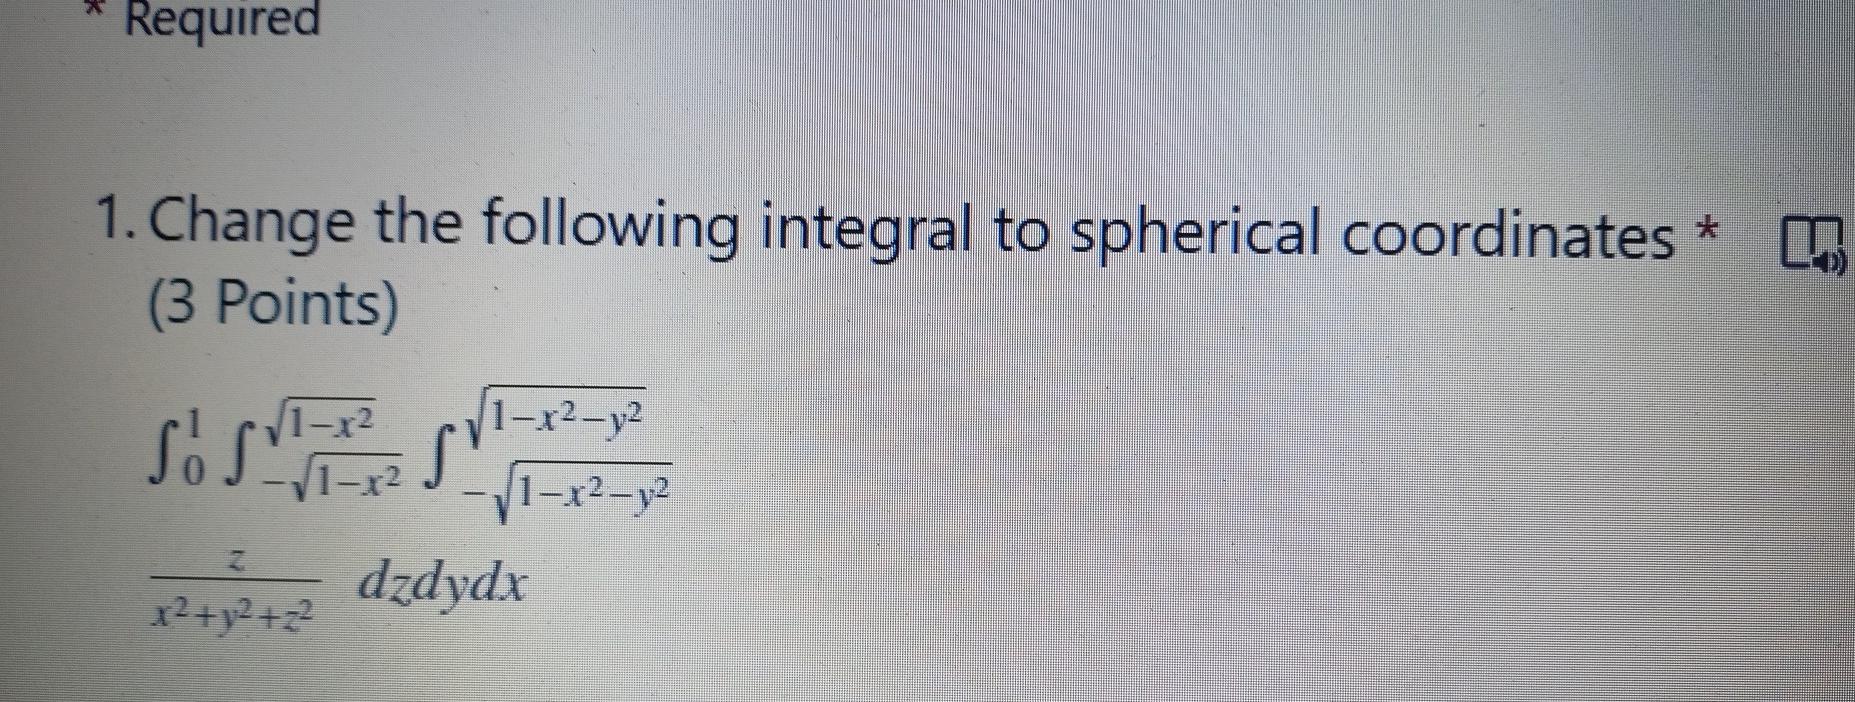 Required 1 Change The Following Integral To Spherical Coordinates M 3 Points Sos 1 X2 Y2 S 1 22 1 X2 Y2 Dzdydx 1